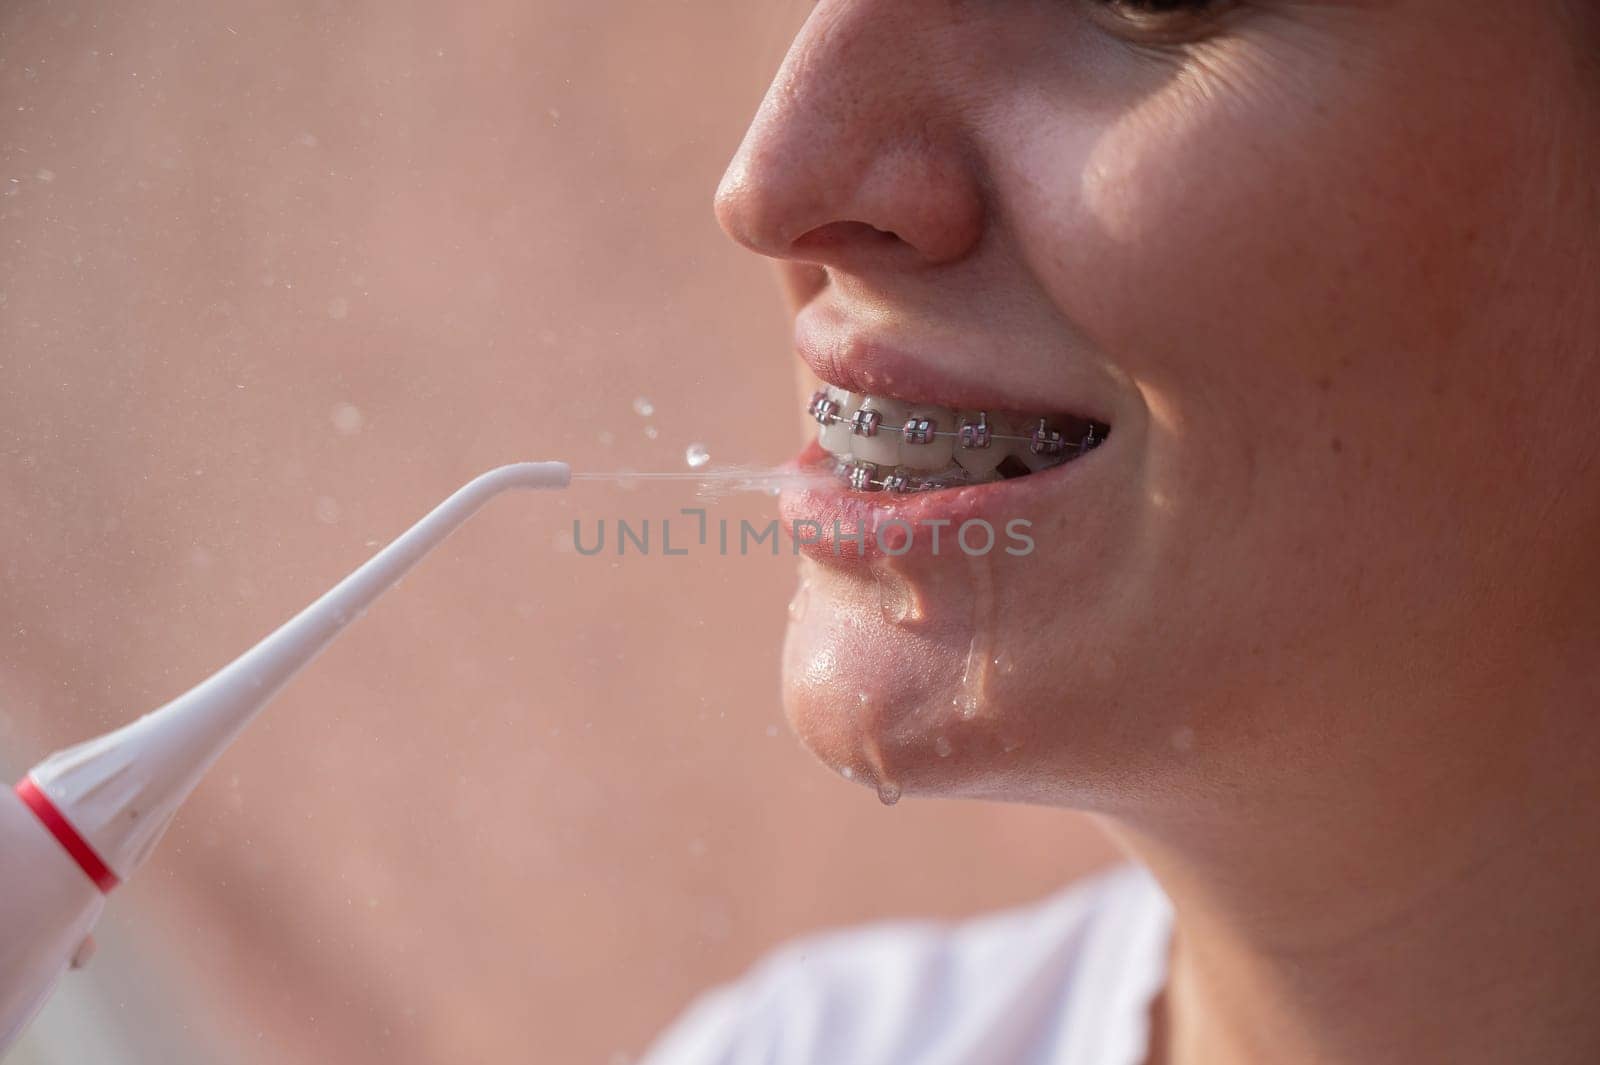 A woman with braces on her teeth uses an irrigator. Close-up portrait. by mrwed54